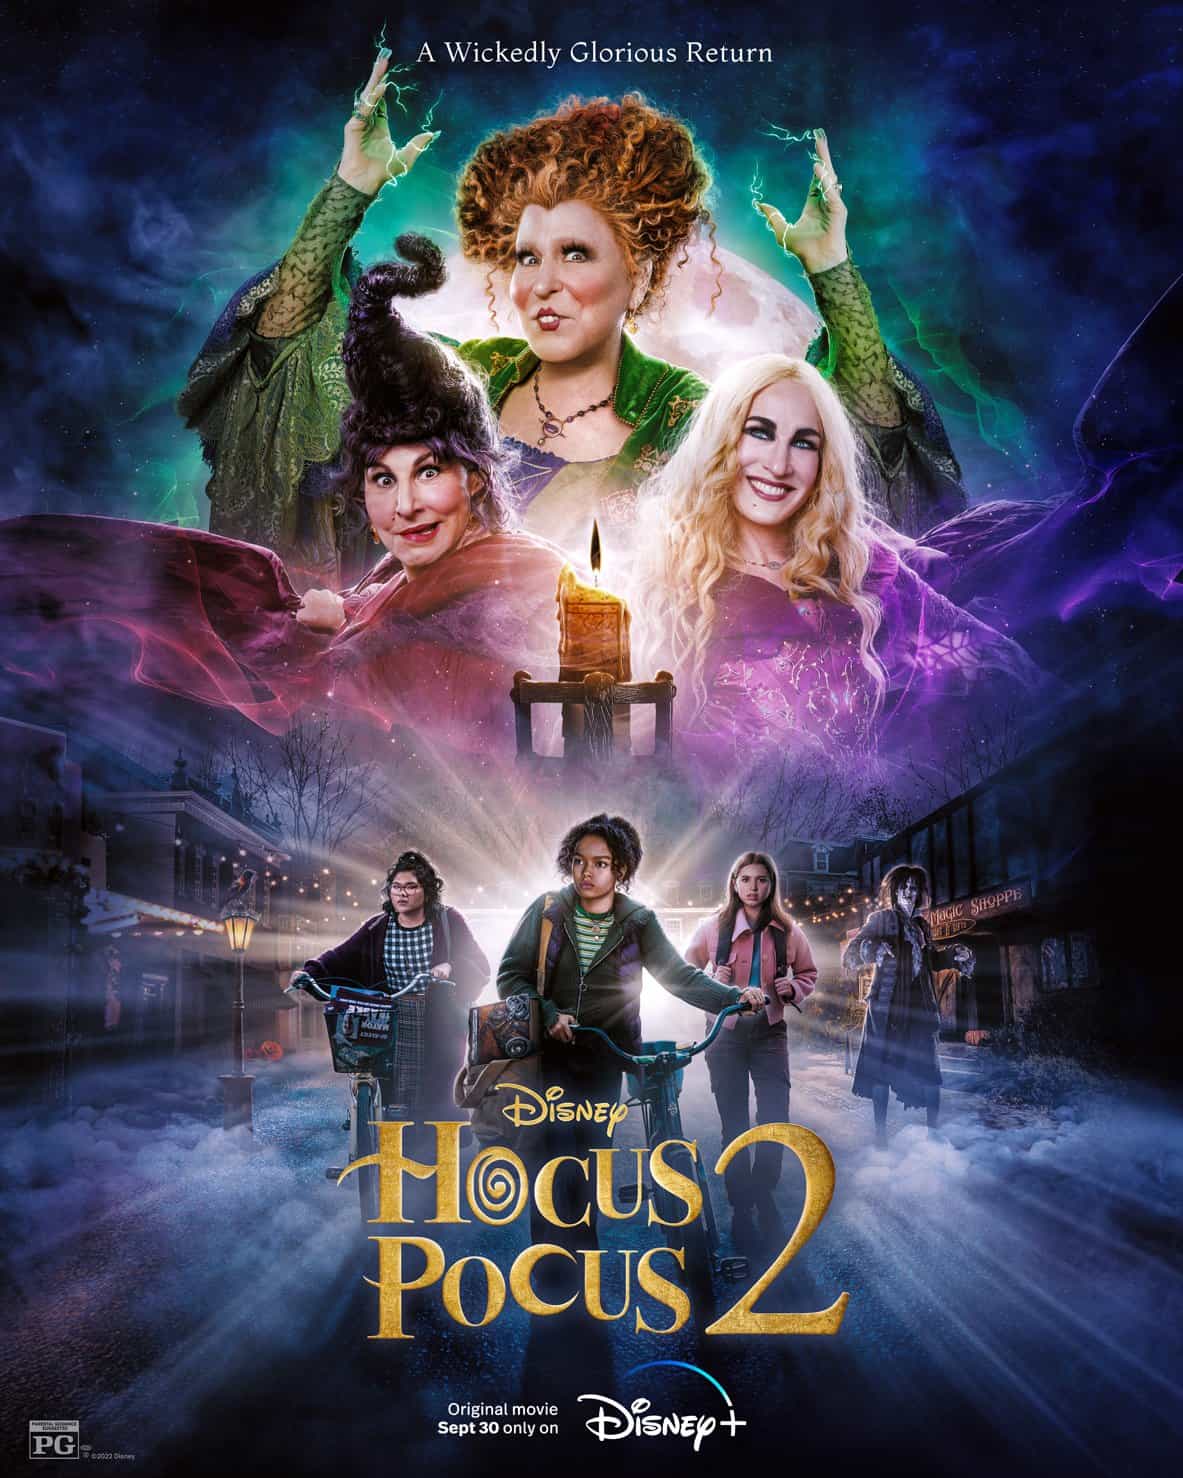 New poster released for Hocus Pocus 2 starring Sarah Jessica Parker - movie UK release date 30th September 2022 #hocuspocus2